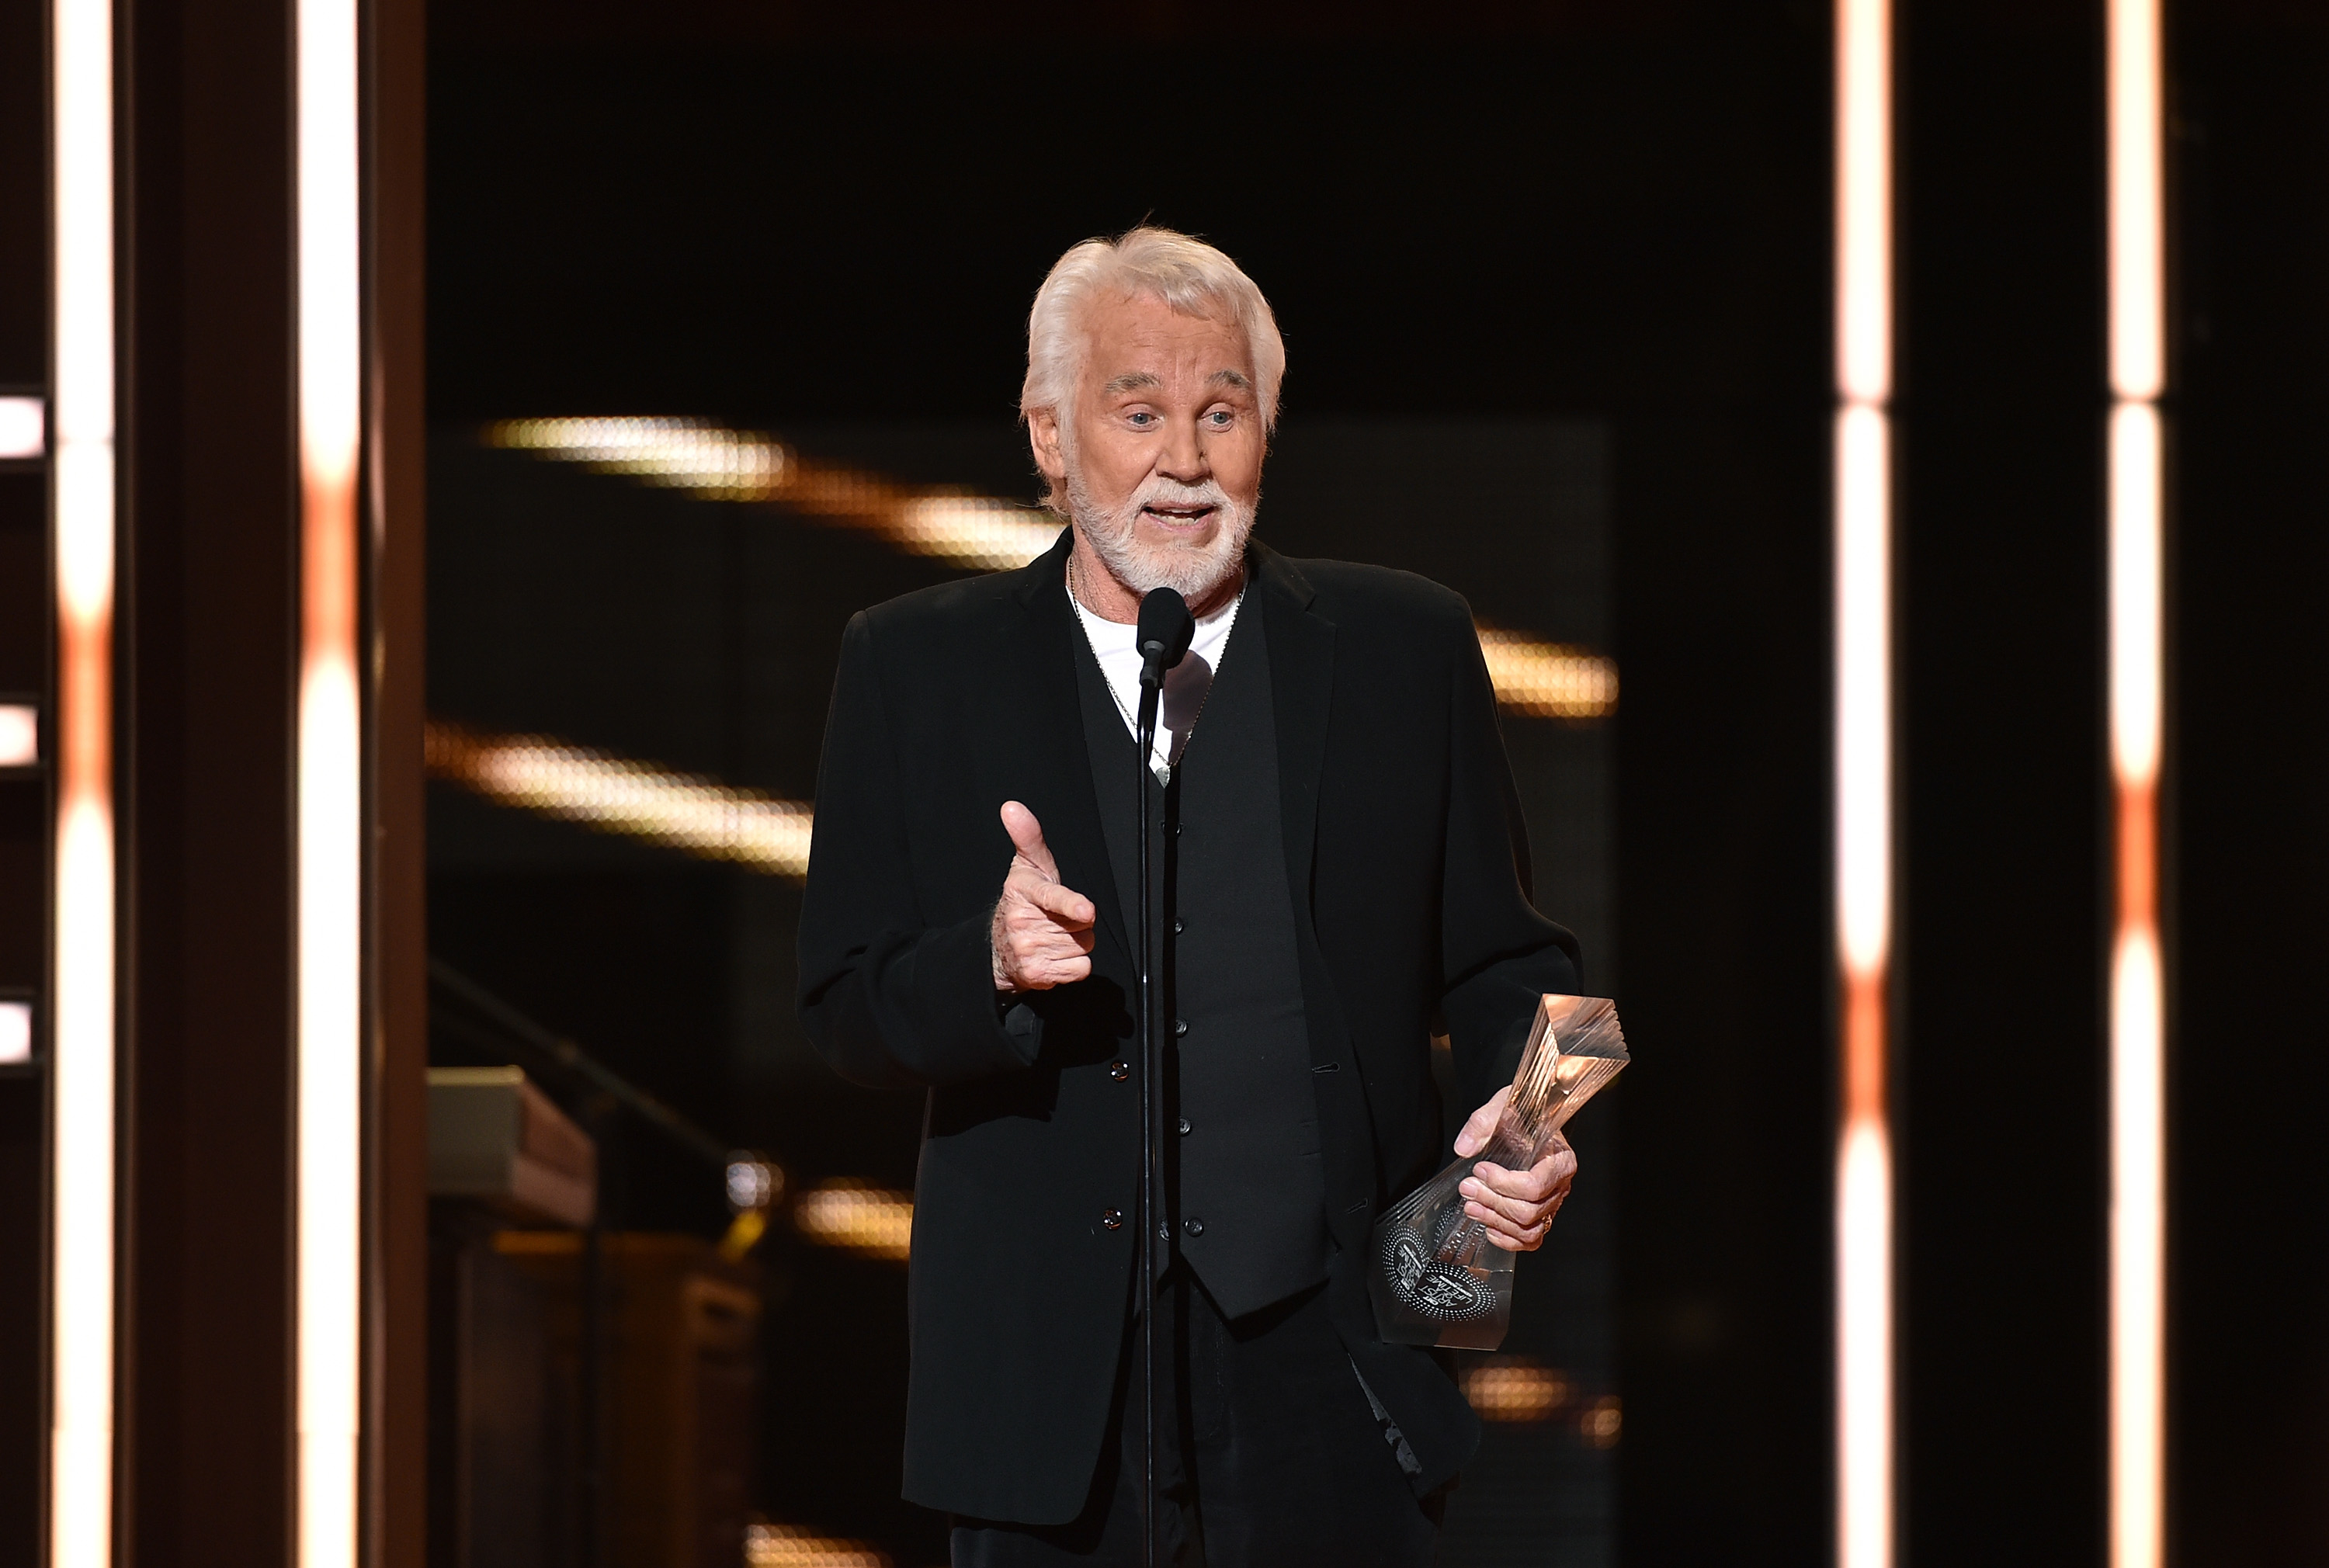 Kenny Rogers onstage accepting an award